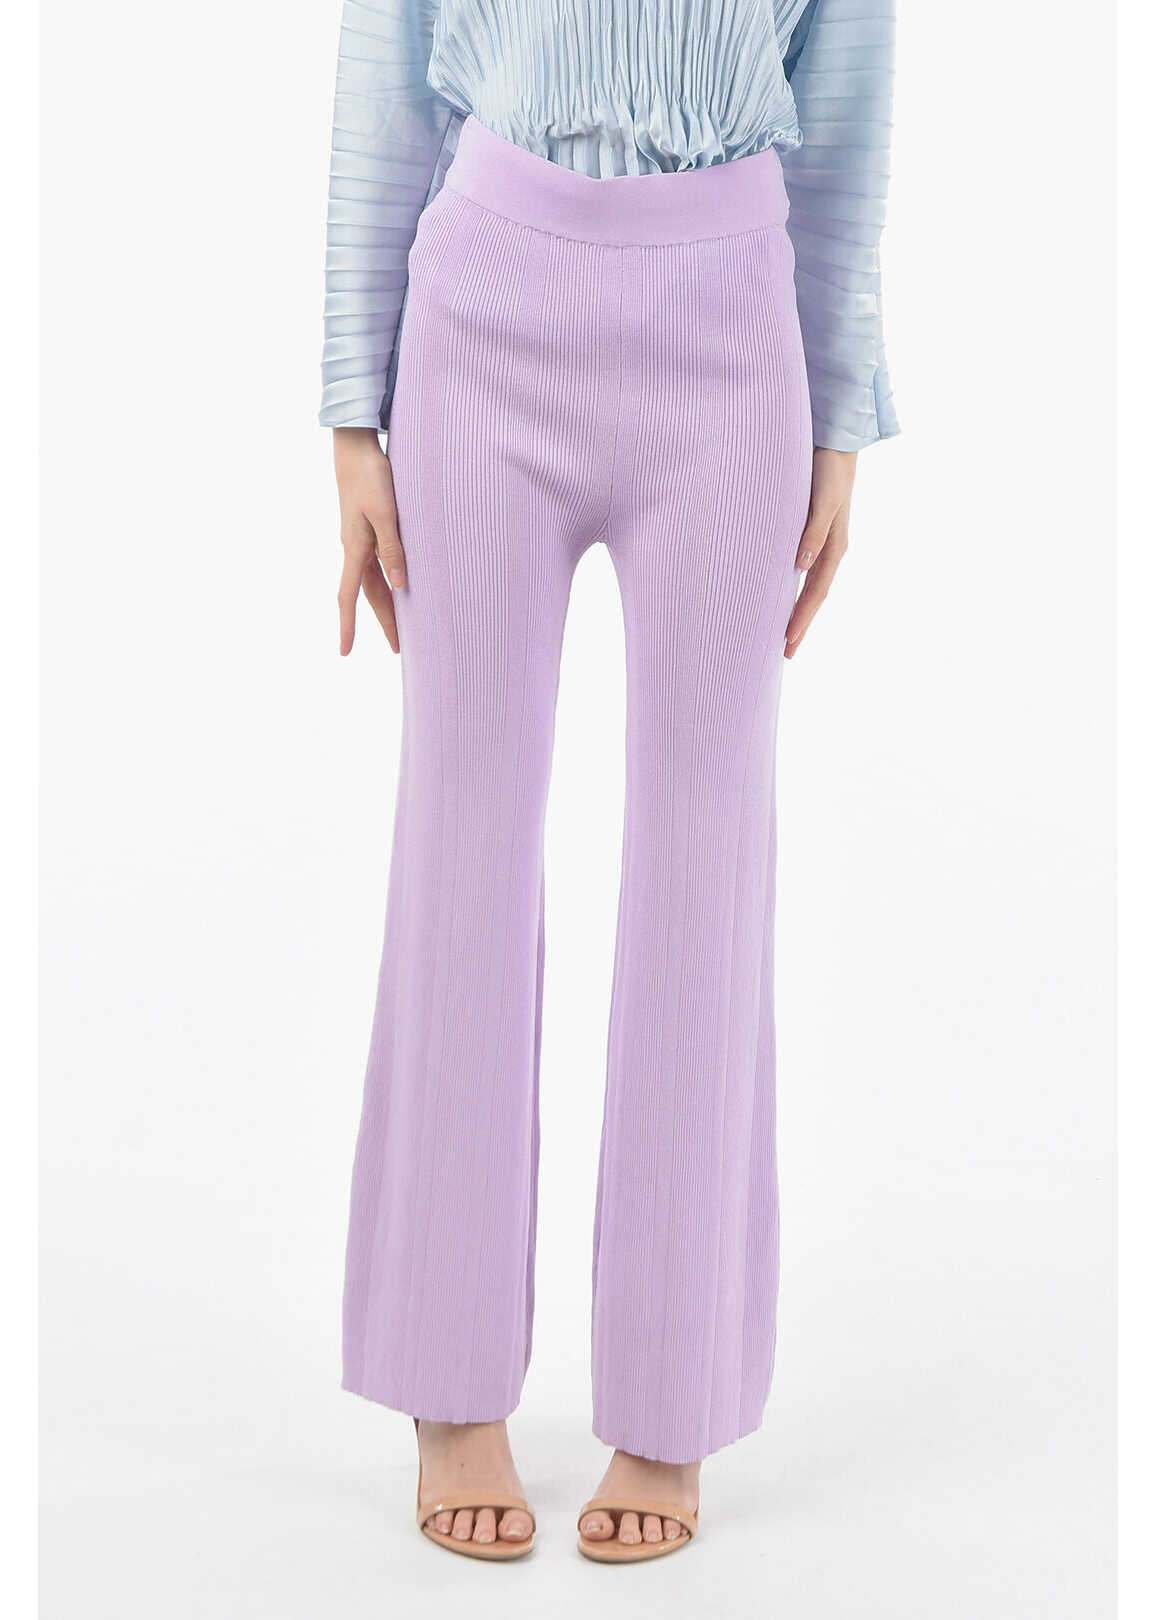 REMAIN Ribbed High Waist Solaima Boot Cut Pants Violet